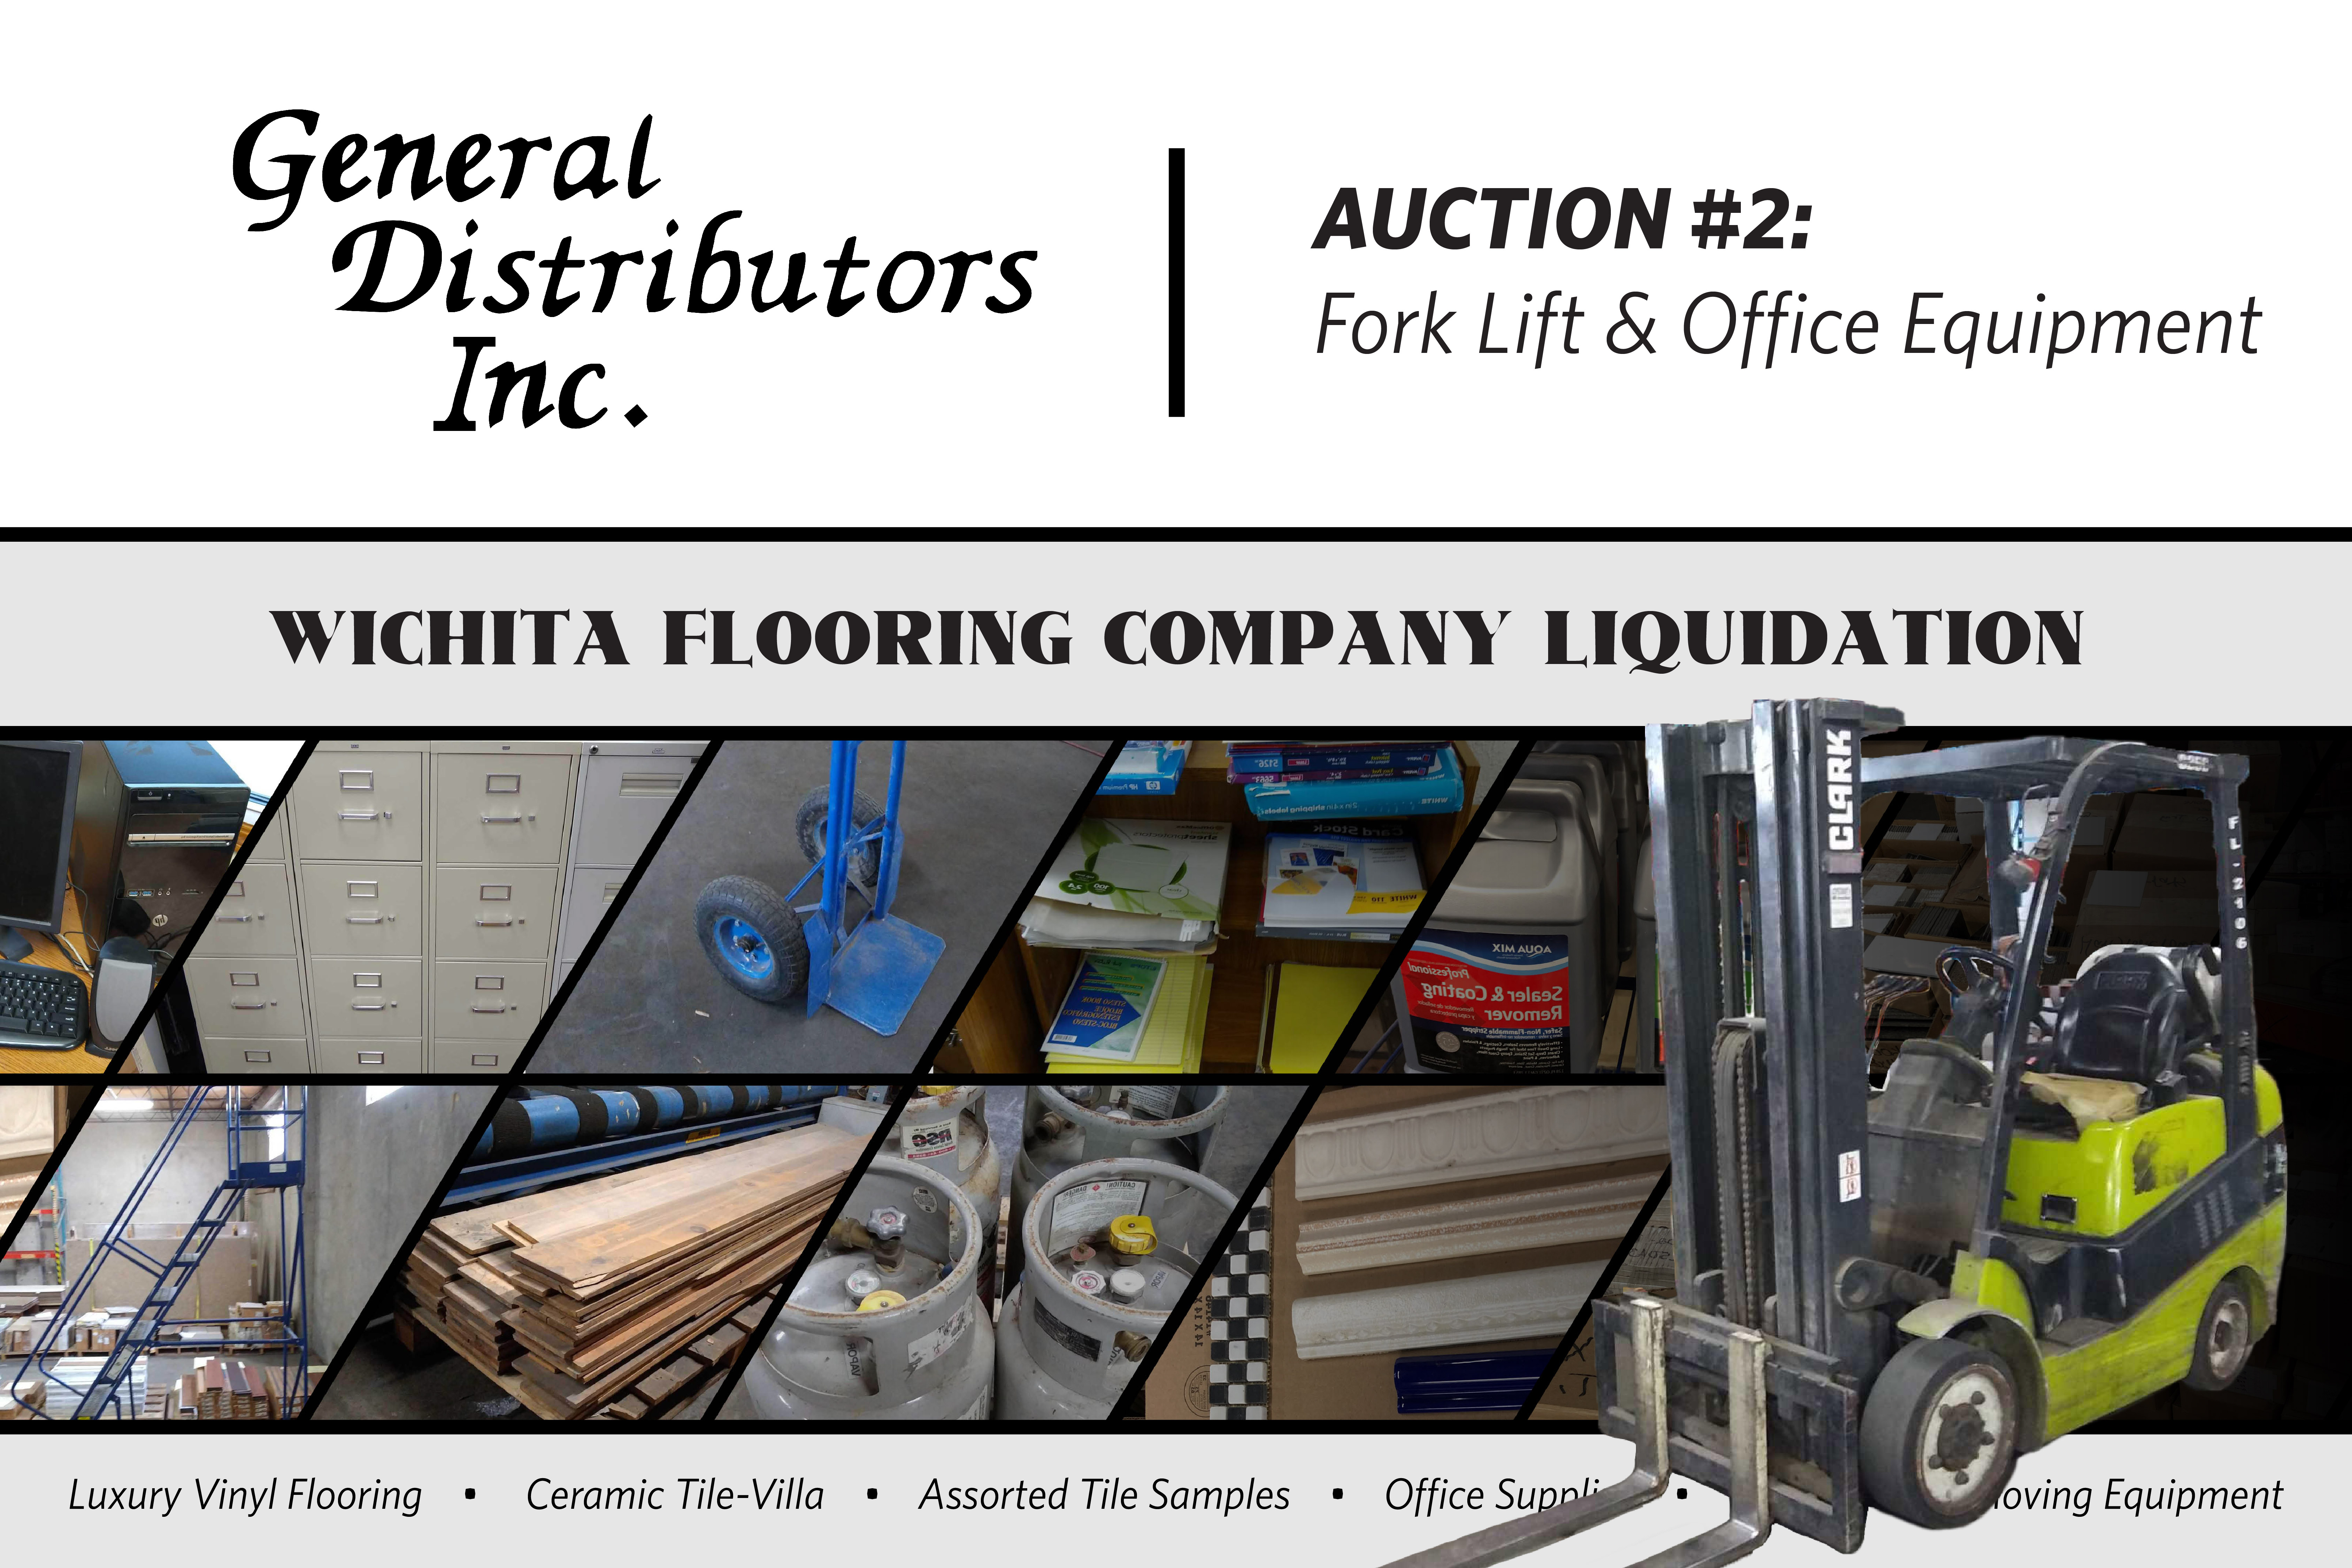 General Distributors General Equipment Forklifts And Office Equipment 800 E Indianapolis Wichita Ks 67211 Mccurdy Auction Real Estate Specialists